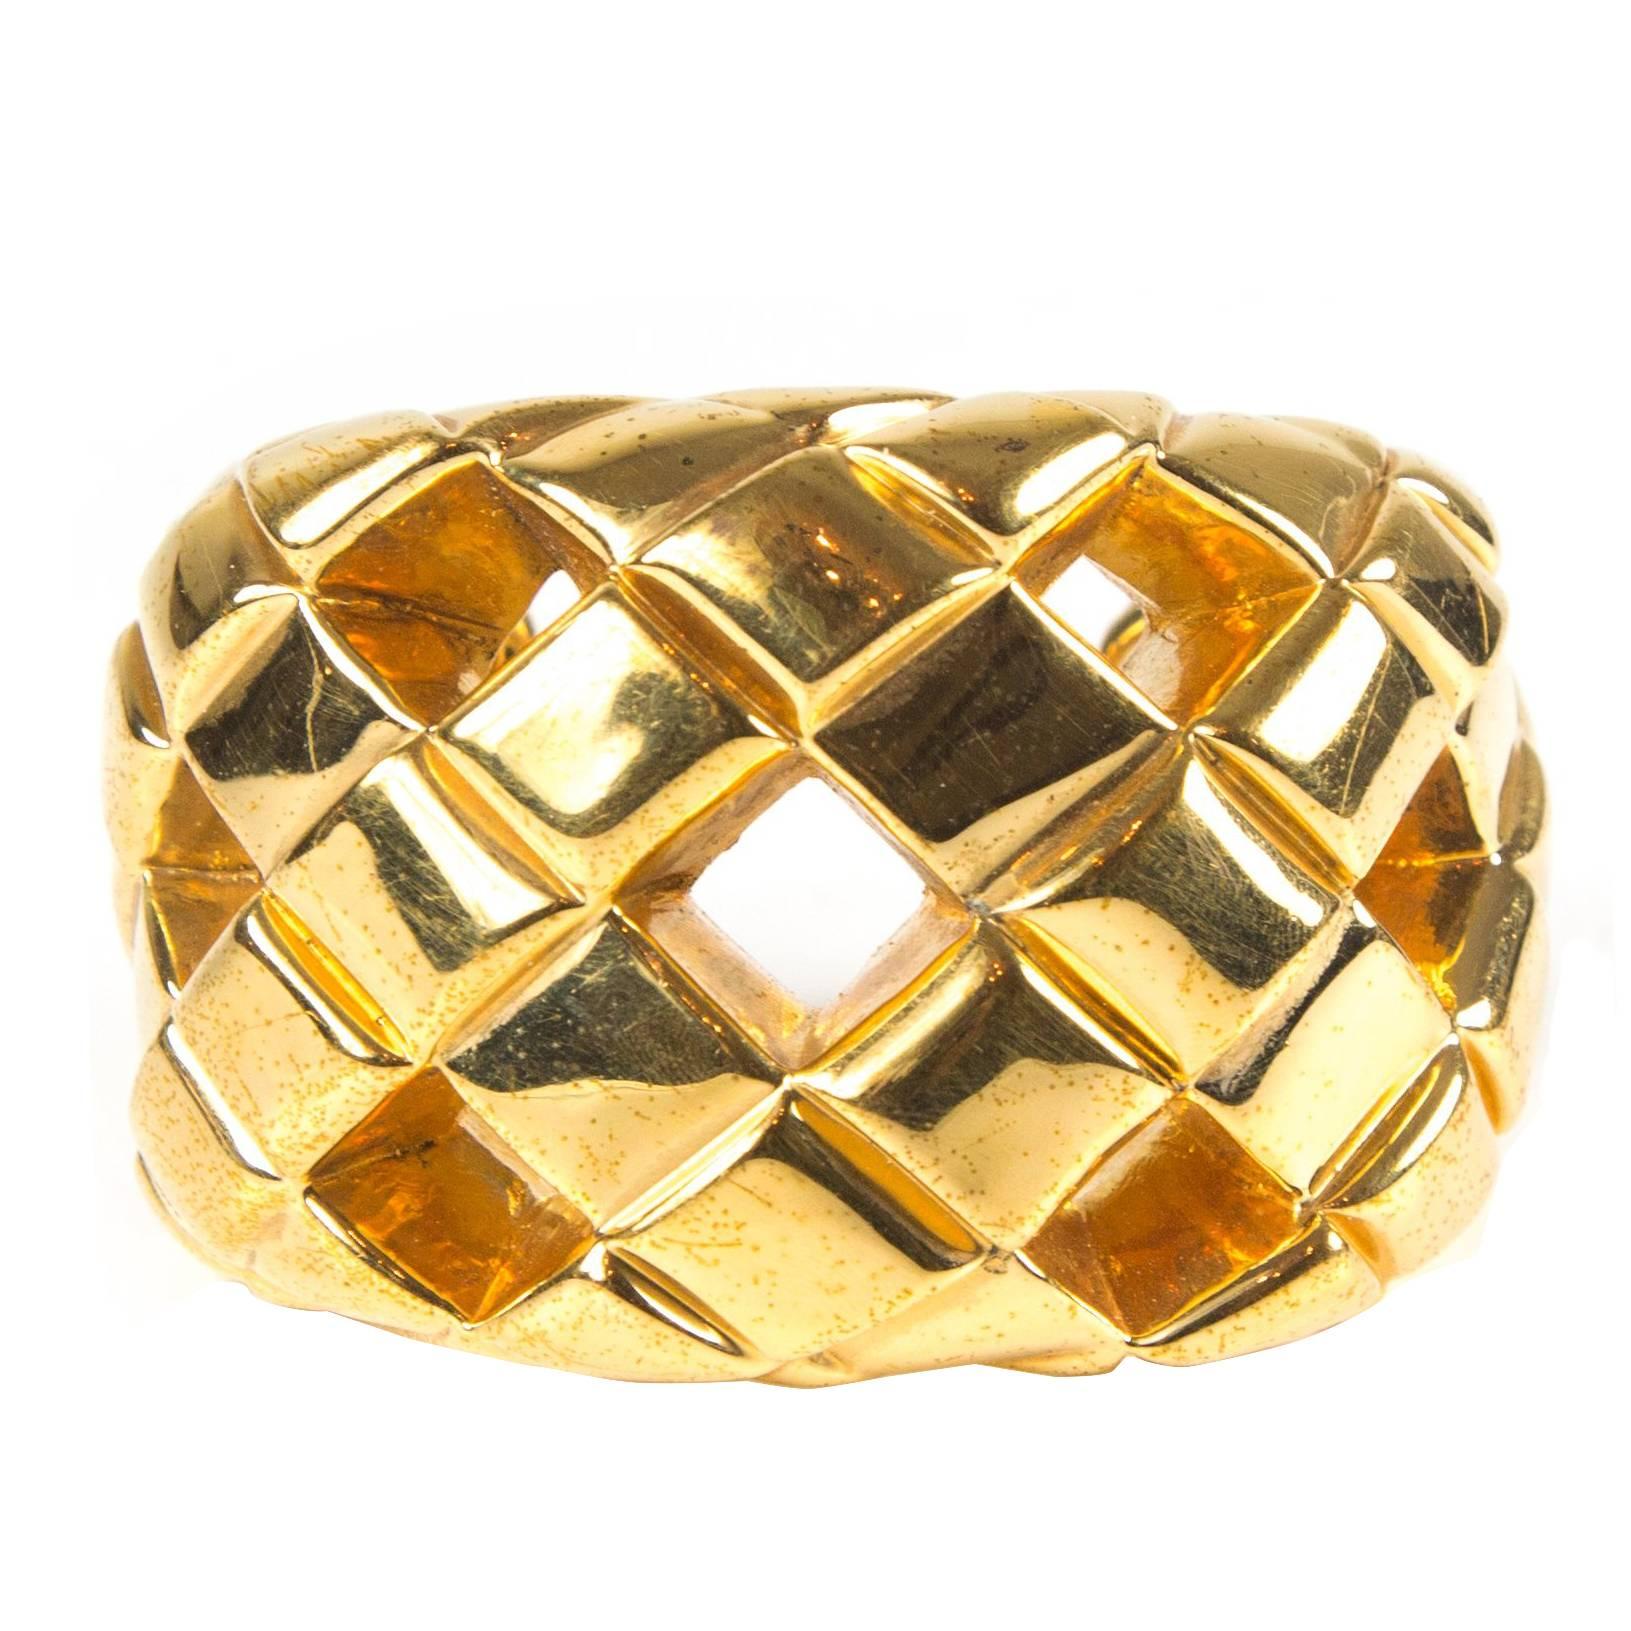 Chanel Rare Bracelet Cut Out Quilted Vintage Cuff - Gold Wide Bangle CC Woven 23